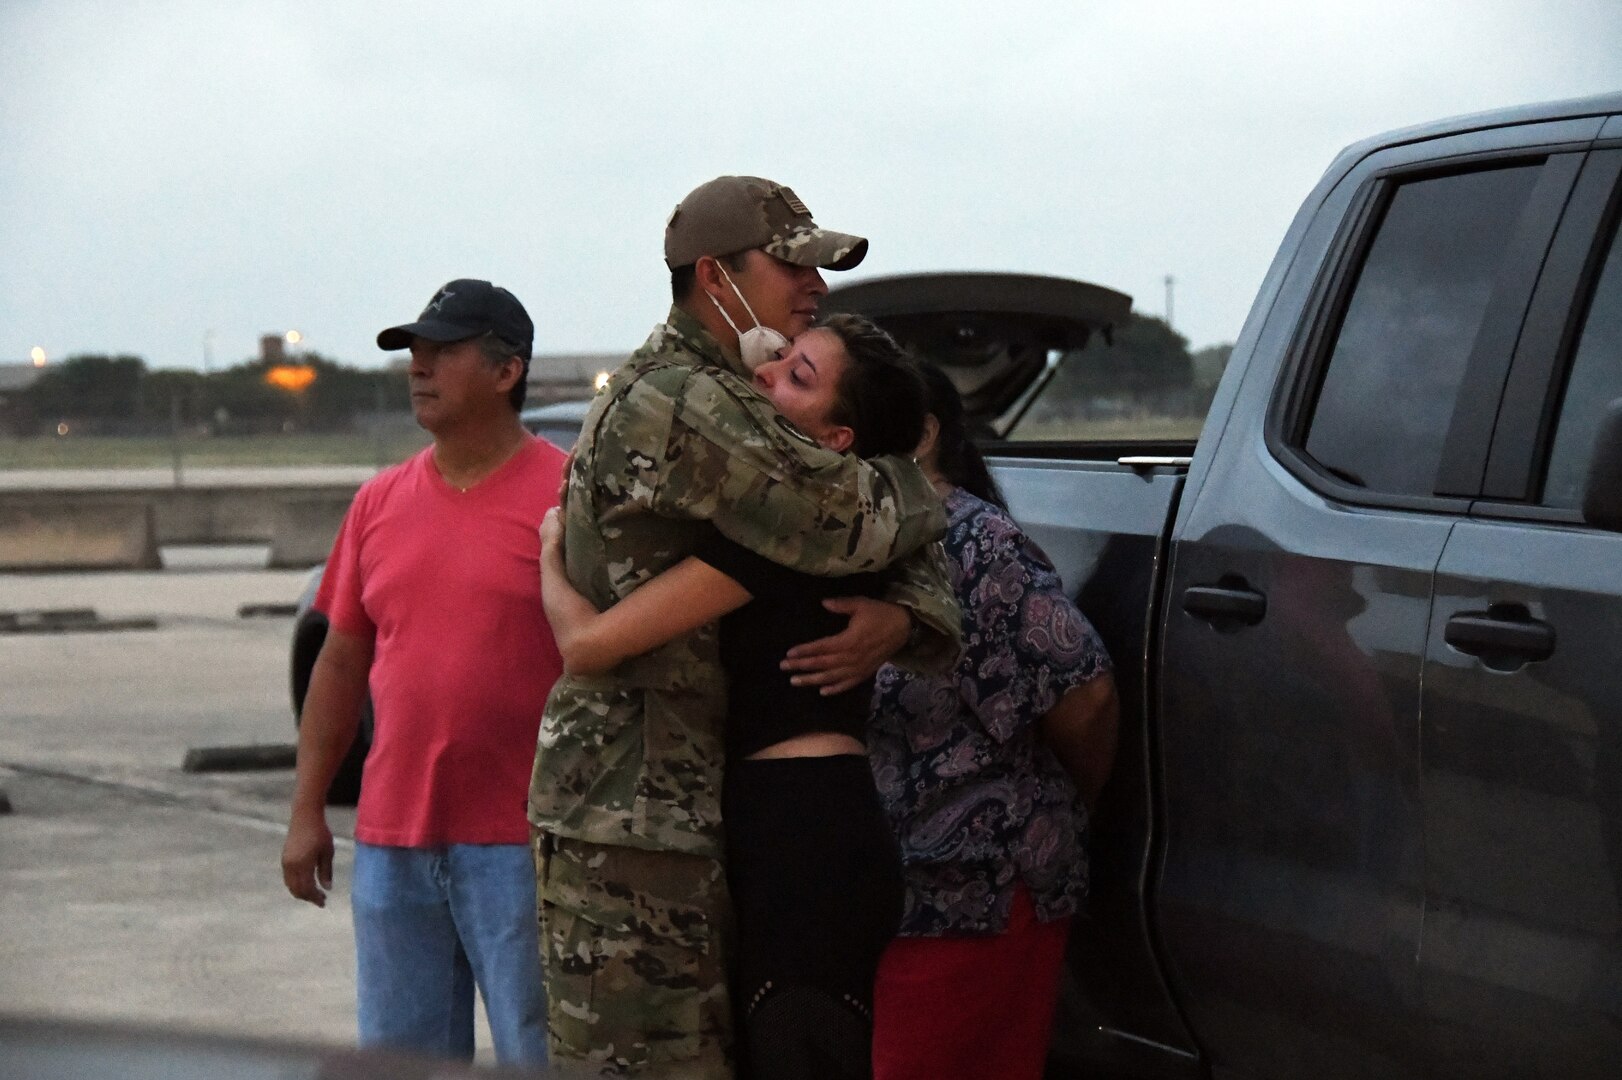 Senior Airman Rene Ruiz, 433rd Civil Engineer Squadron firefighter, hugs his girlfriend, Angelica Cabuto, while his parents stand nearby June 28, 2020, at Joint Base San Antonio-Lackland, Texas.